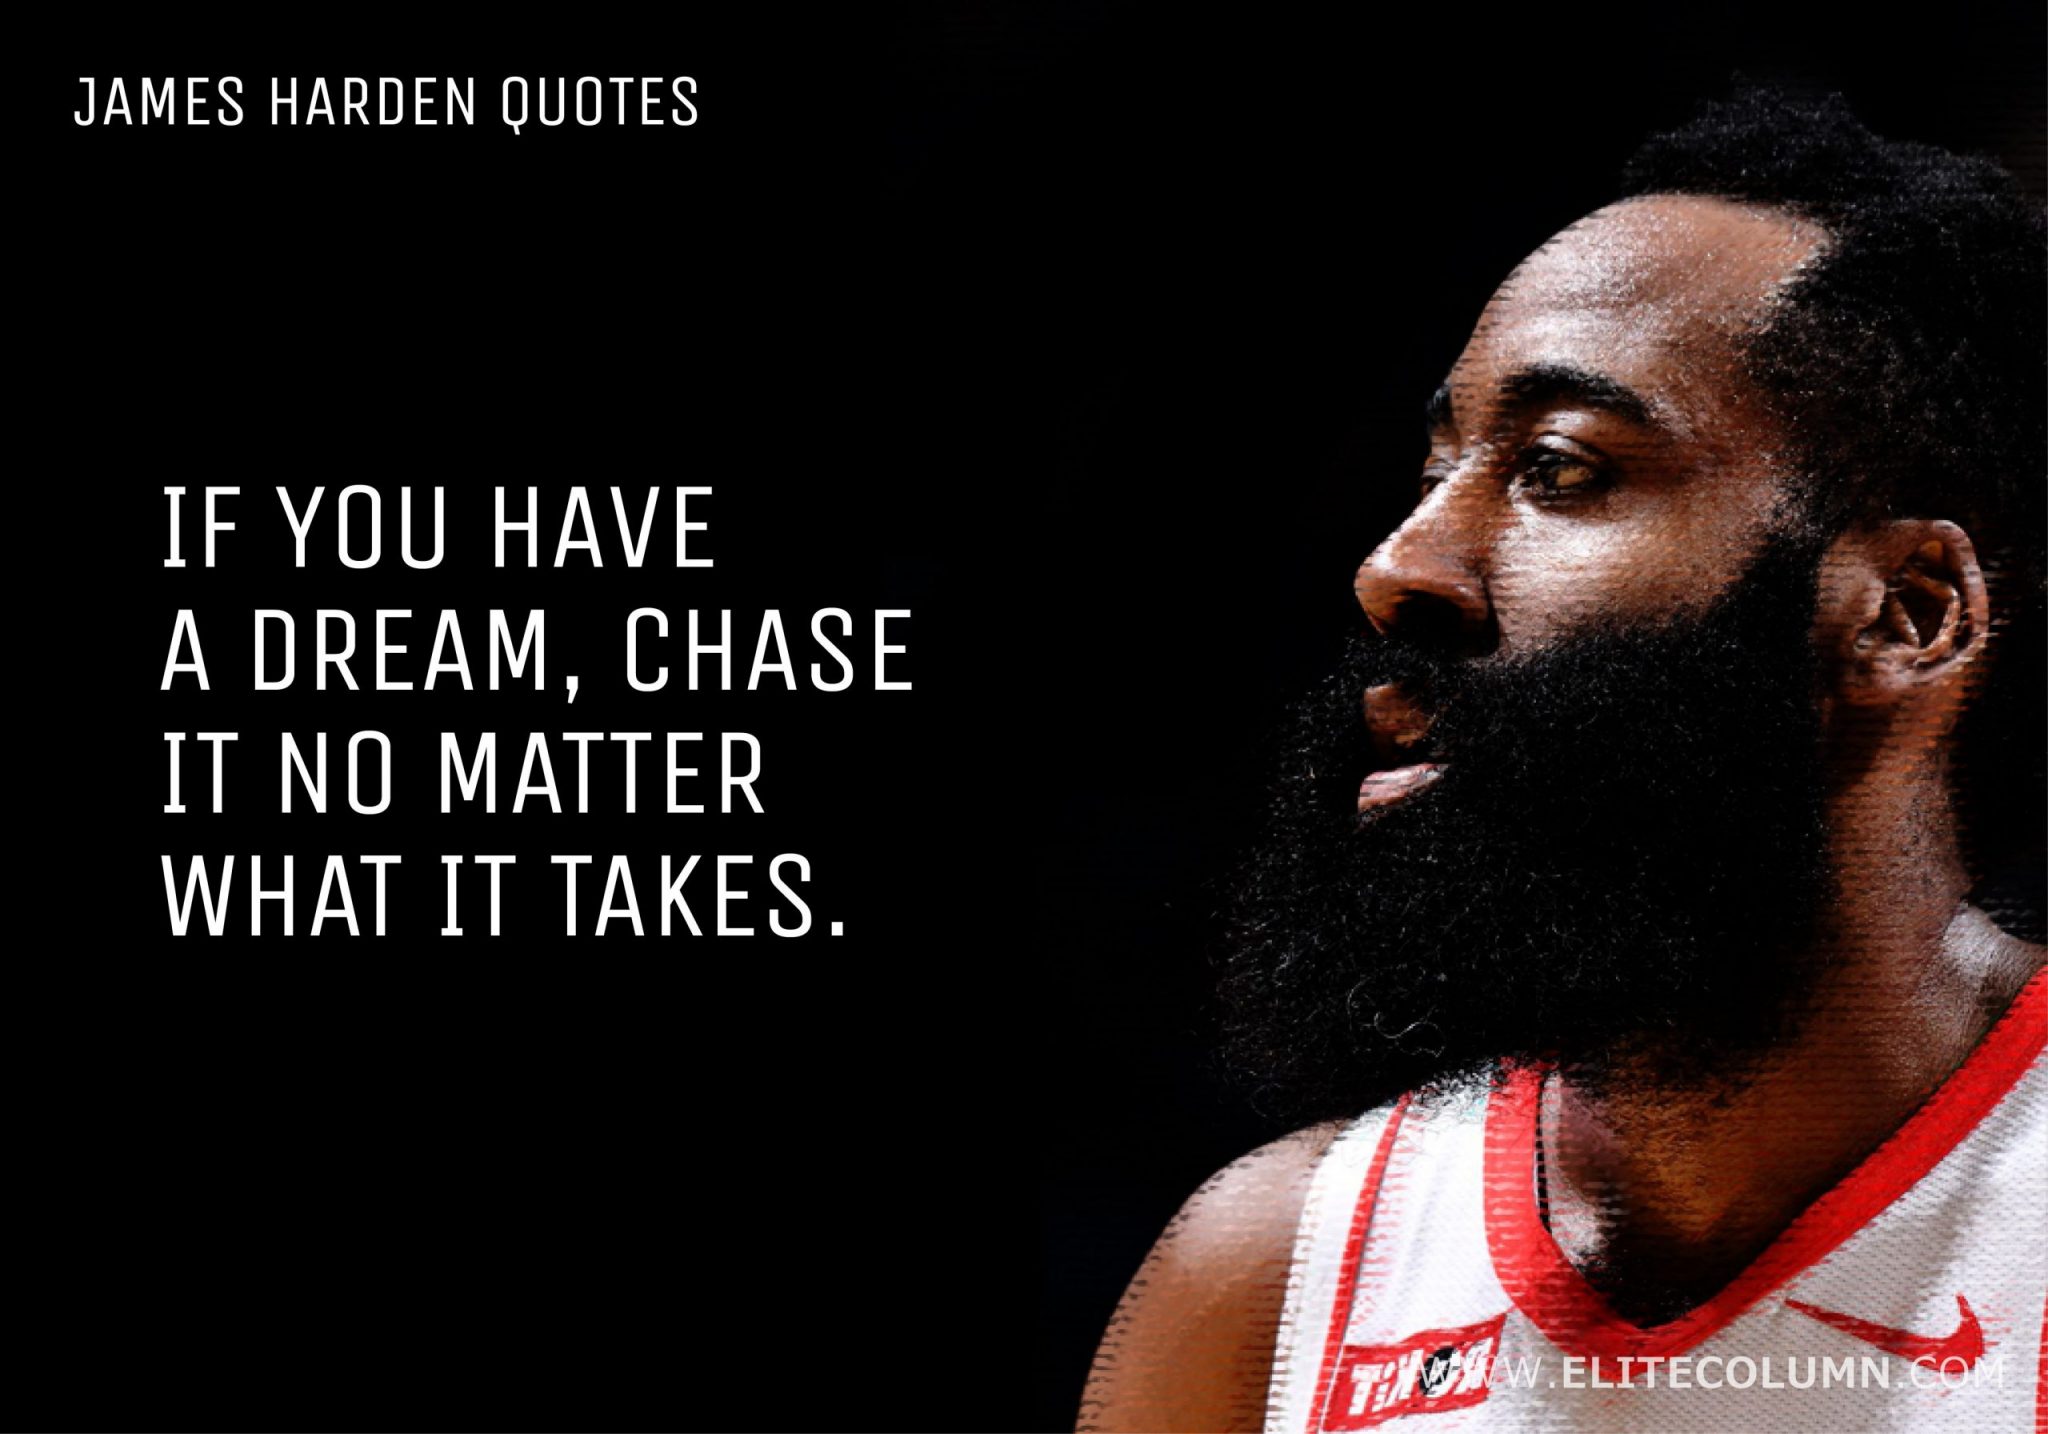 James Harden Quotes (15)